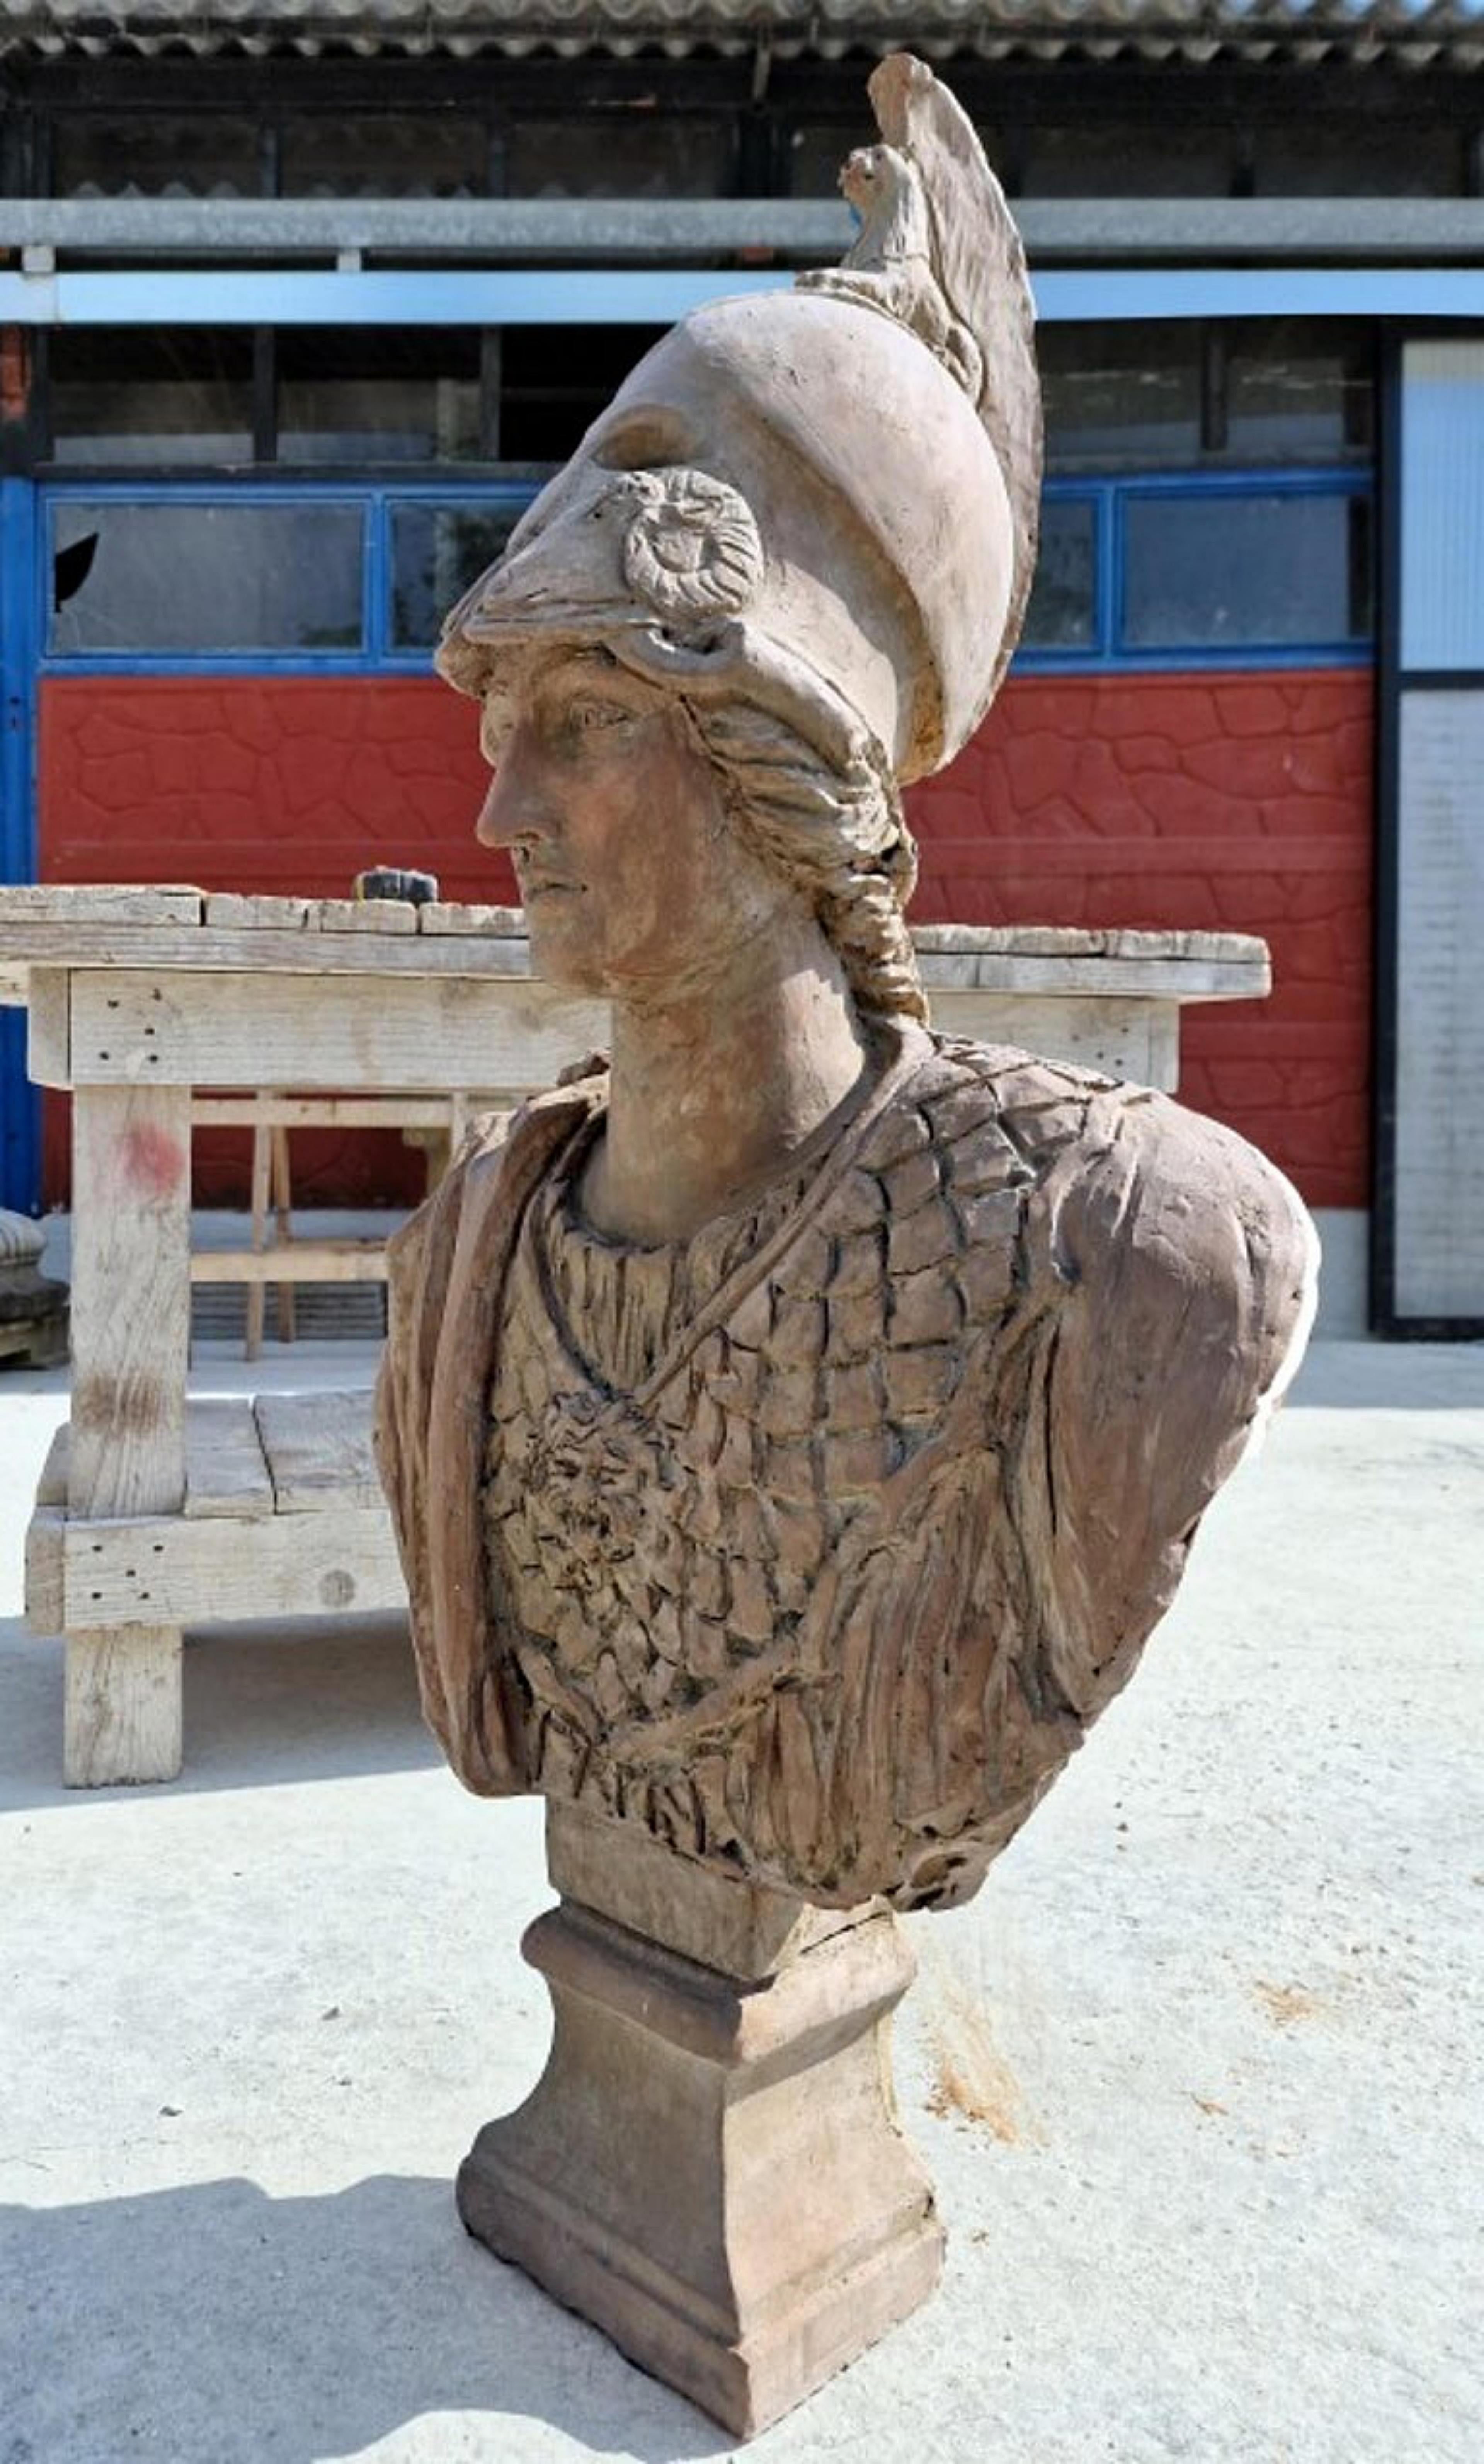 LARGE TERRACOTTA BUST OF ATHENA FROM THE VATICAN MUSEUMS Early 20th Century

Unique and non-replicable hand formed bust

Italia - Florence

HEIGHT 112 cms
WIDTH 58cm
DEPTH 38cm
WEIGHT 40Kg
MATERIAL Terracotta
MUSEUM WHERE THE ORIGINAL IS EXHIBITED